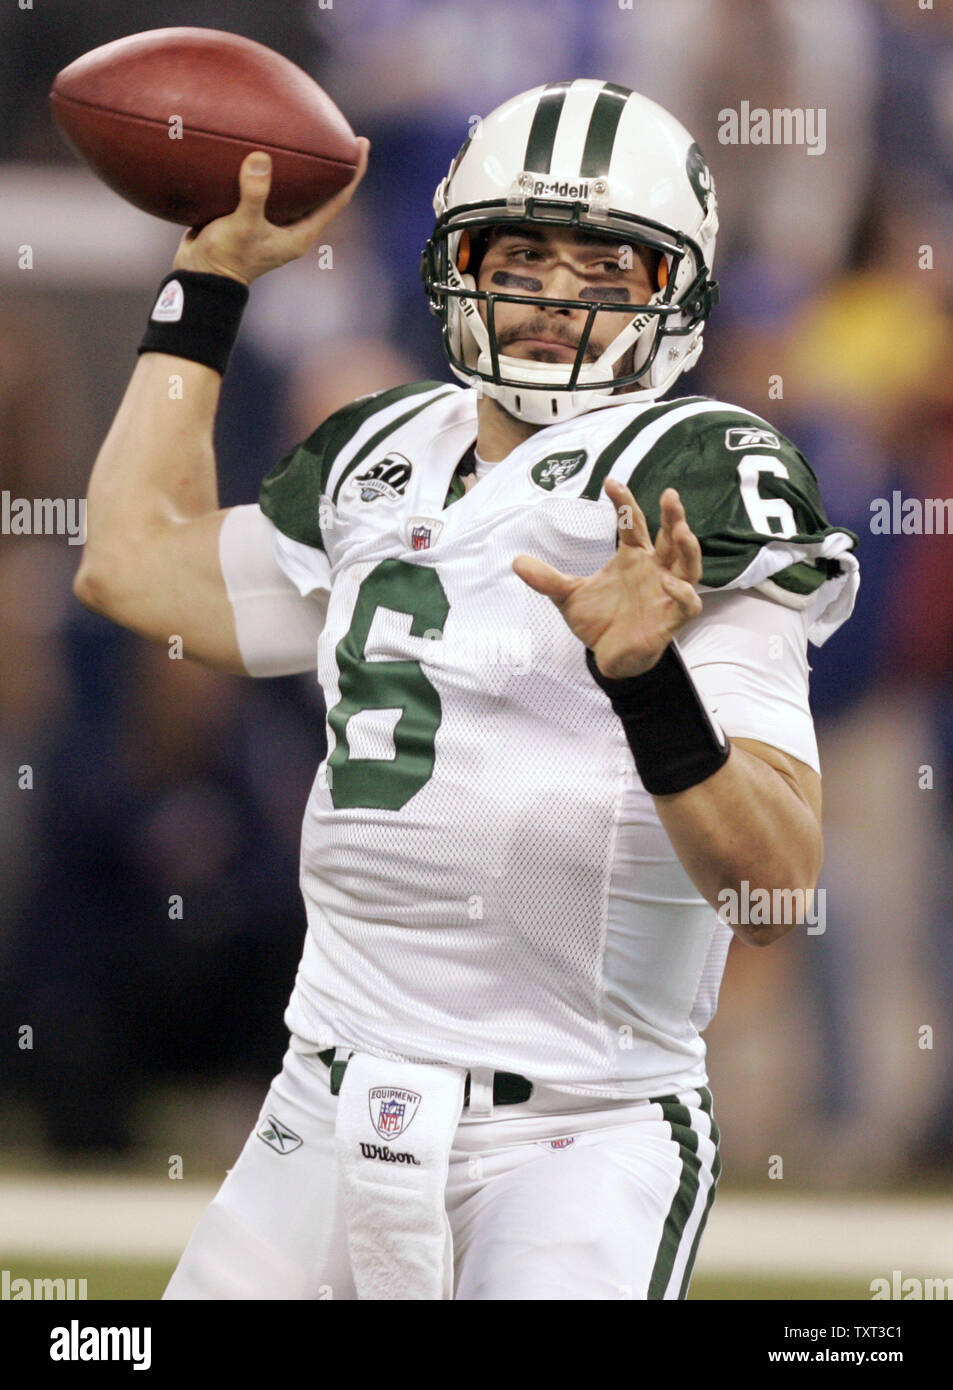 New York Jets quarterback Mark Sanchez (6) drops back to pass against the  Indianapolis Colts during the first quarter of their AFC Championship  Playoff game at Lucas Oil Field in Indianapolis on